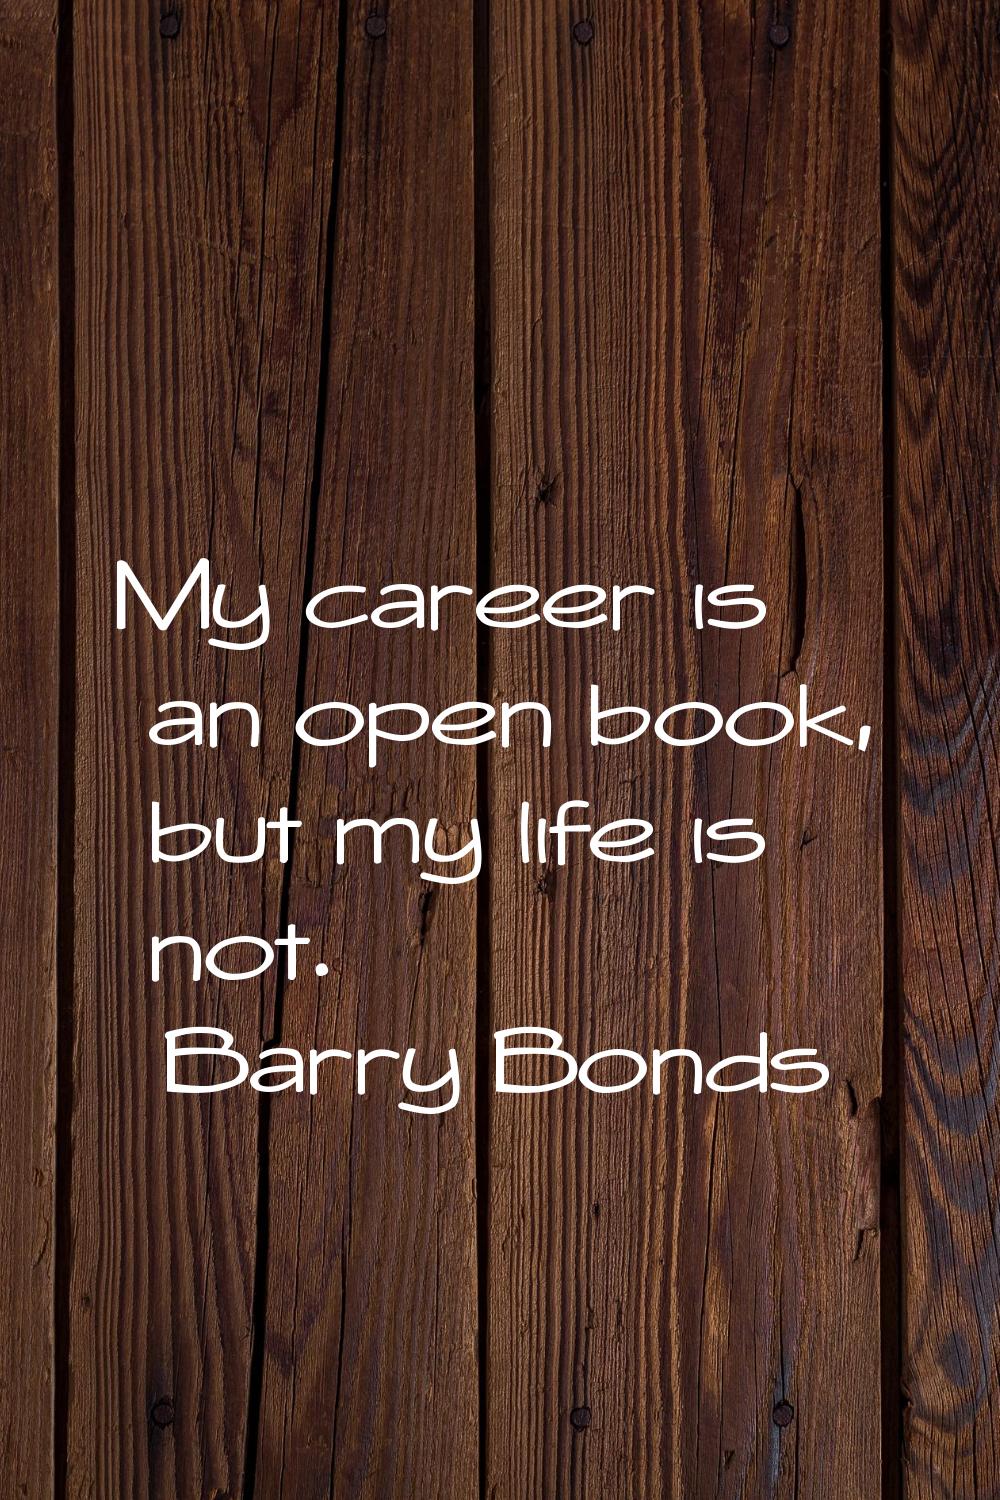 My career is an open book, but my life is not.